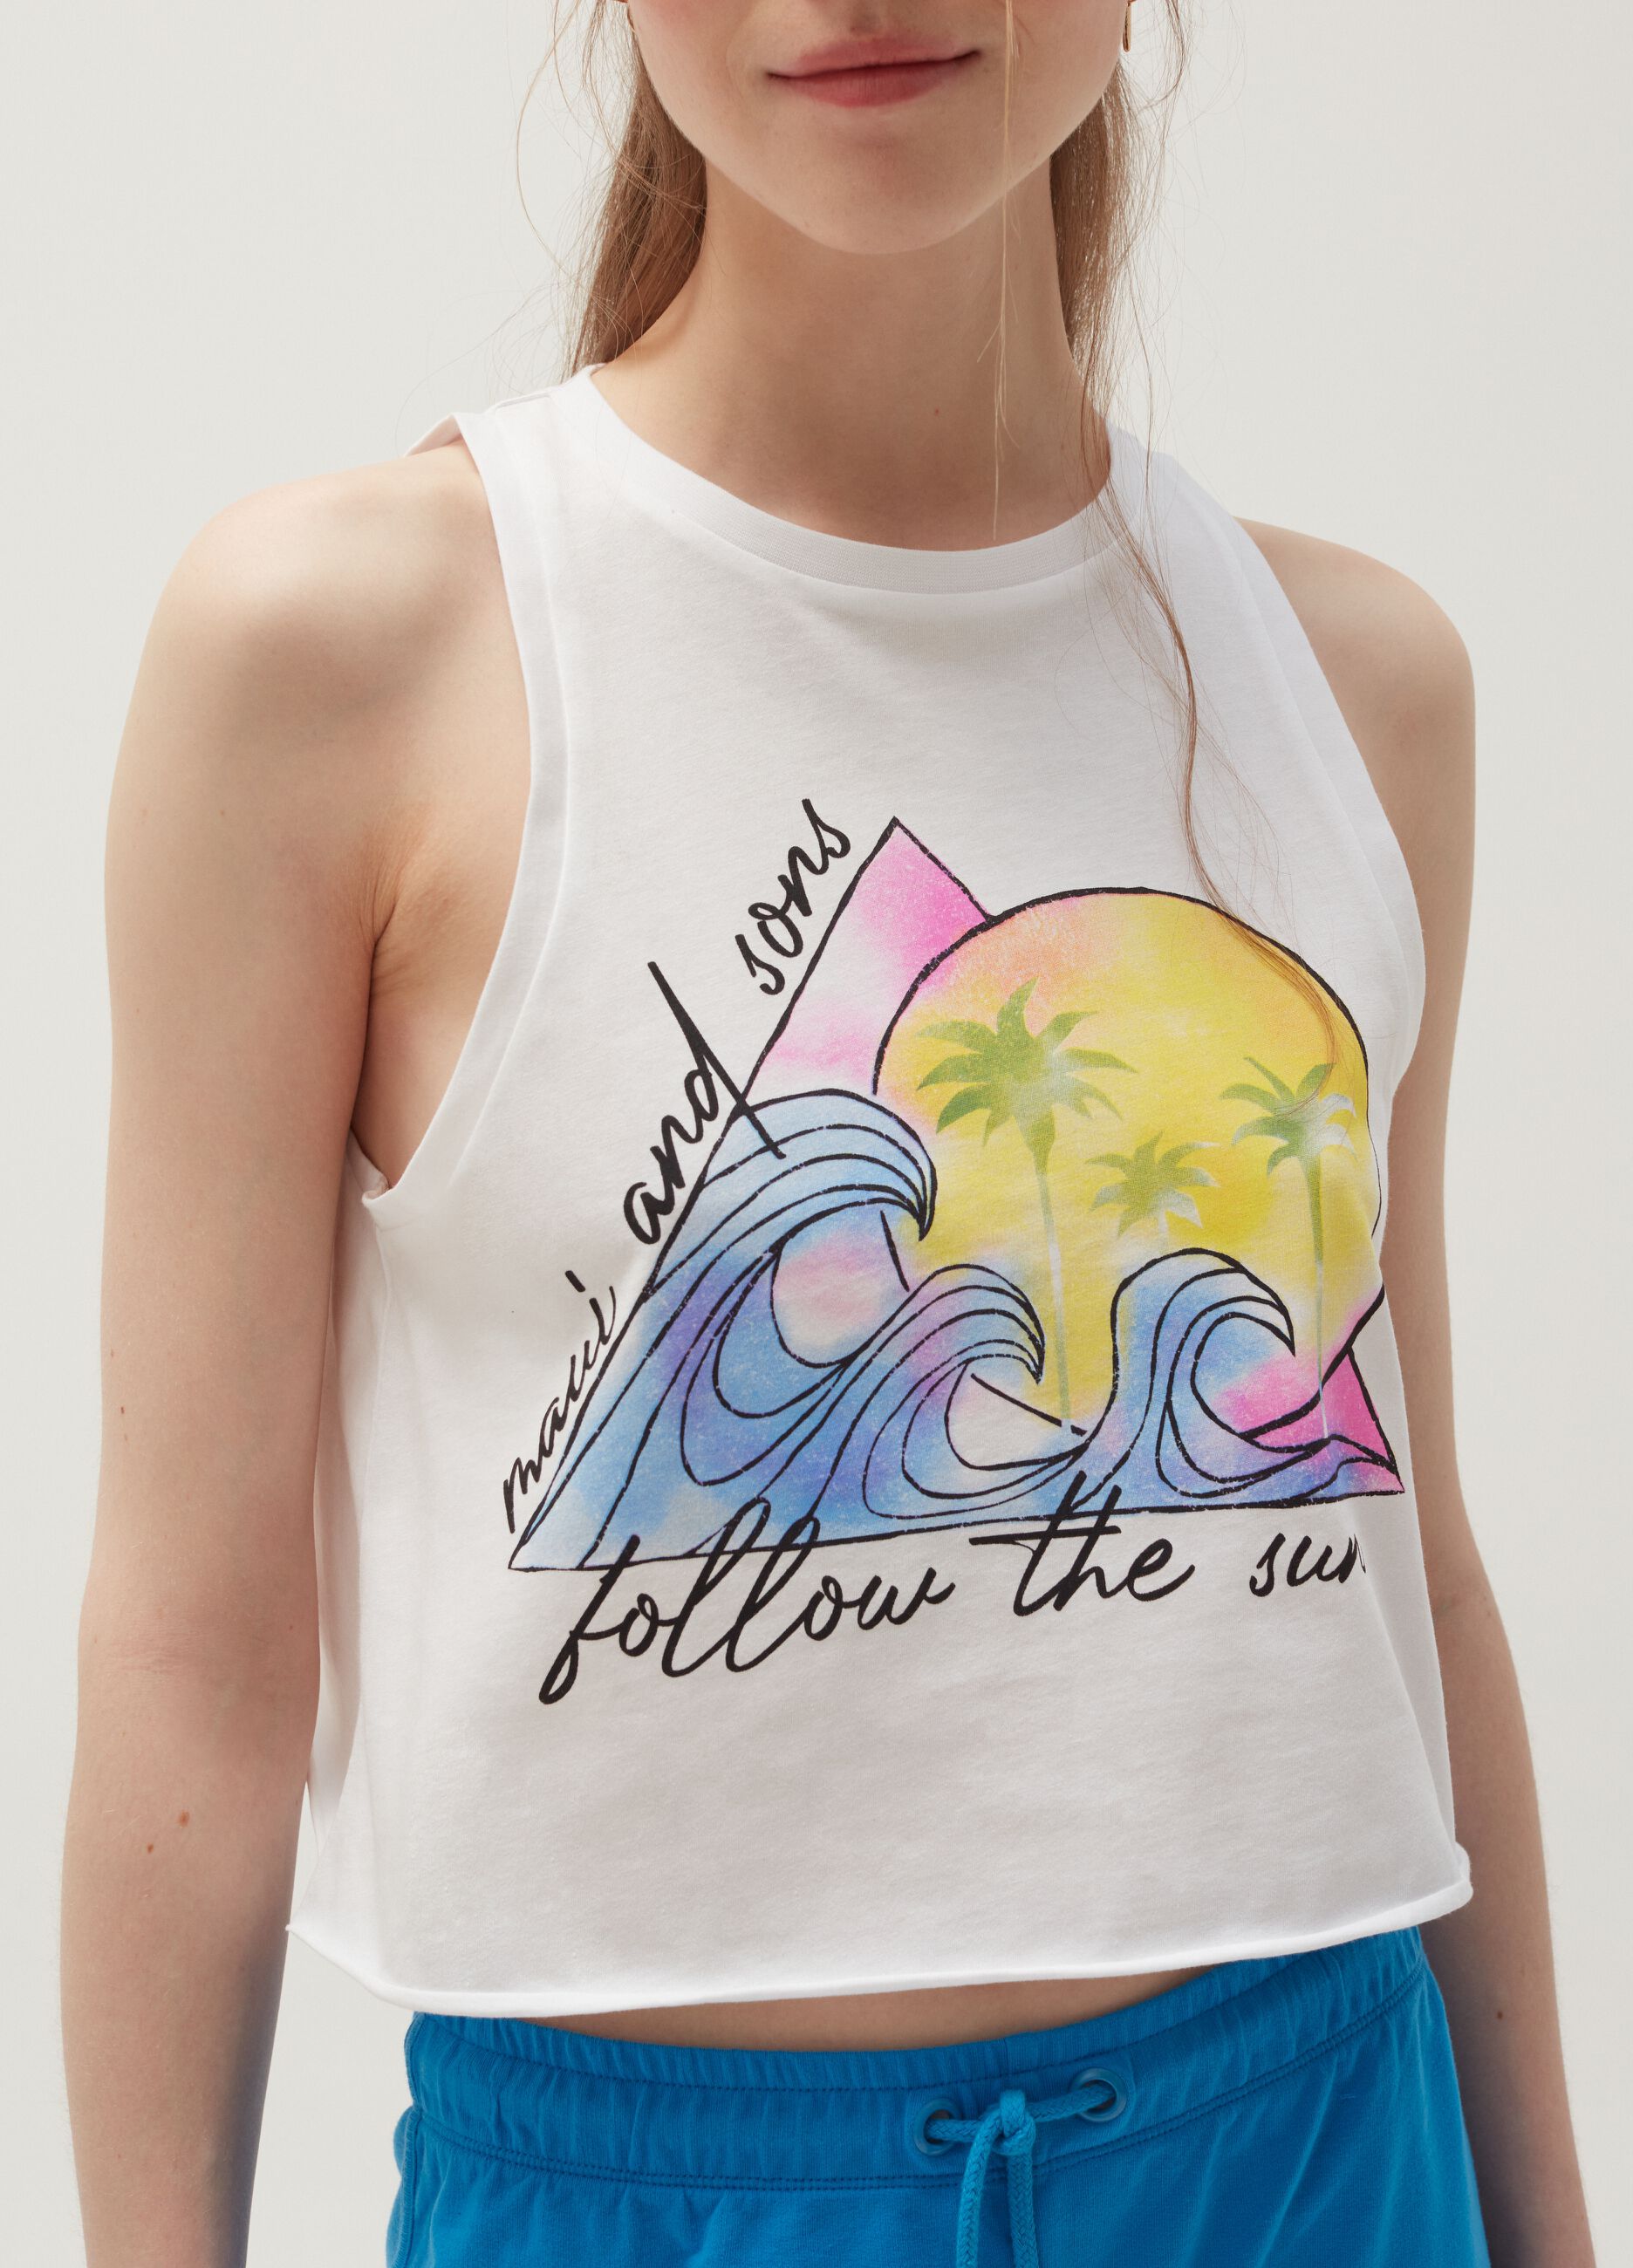 Cotton tank top with print by Maui and Sons